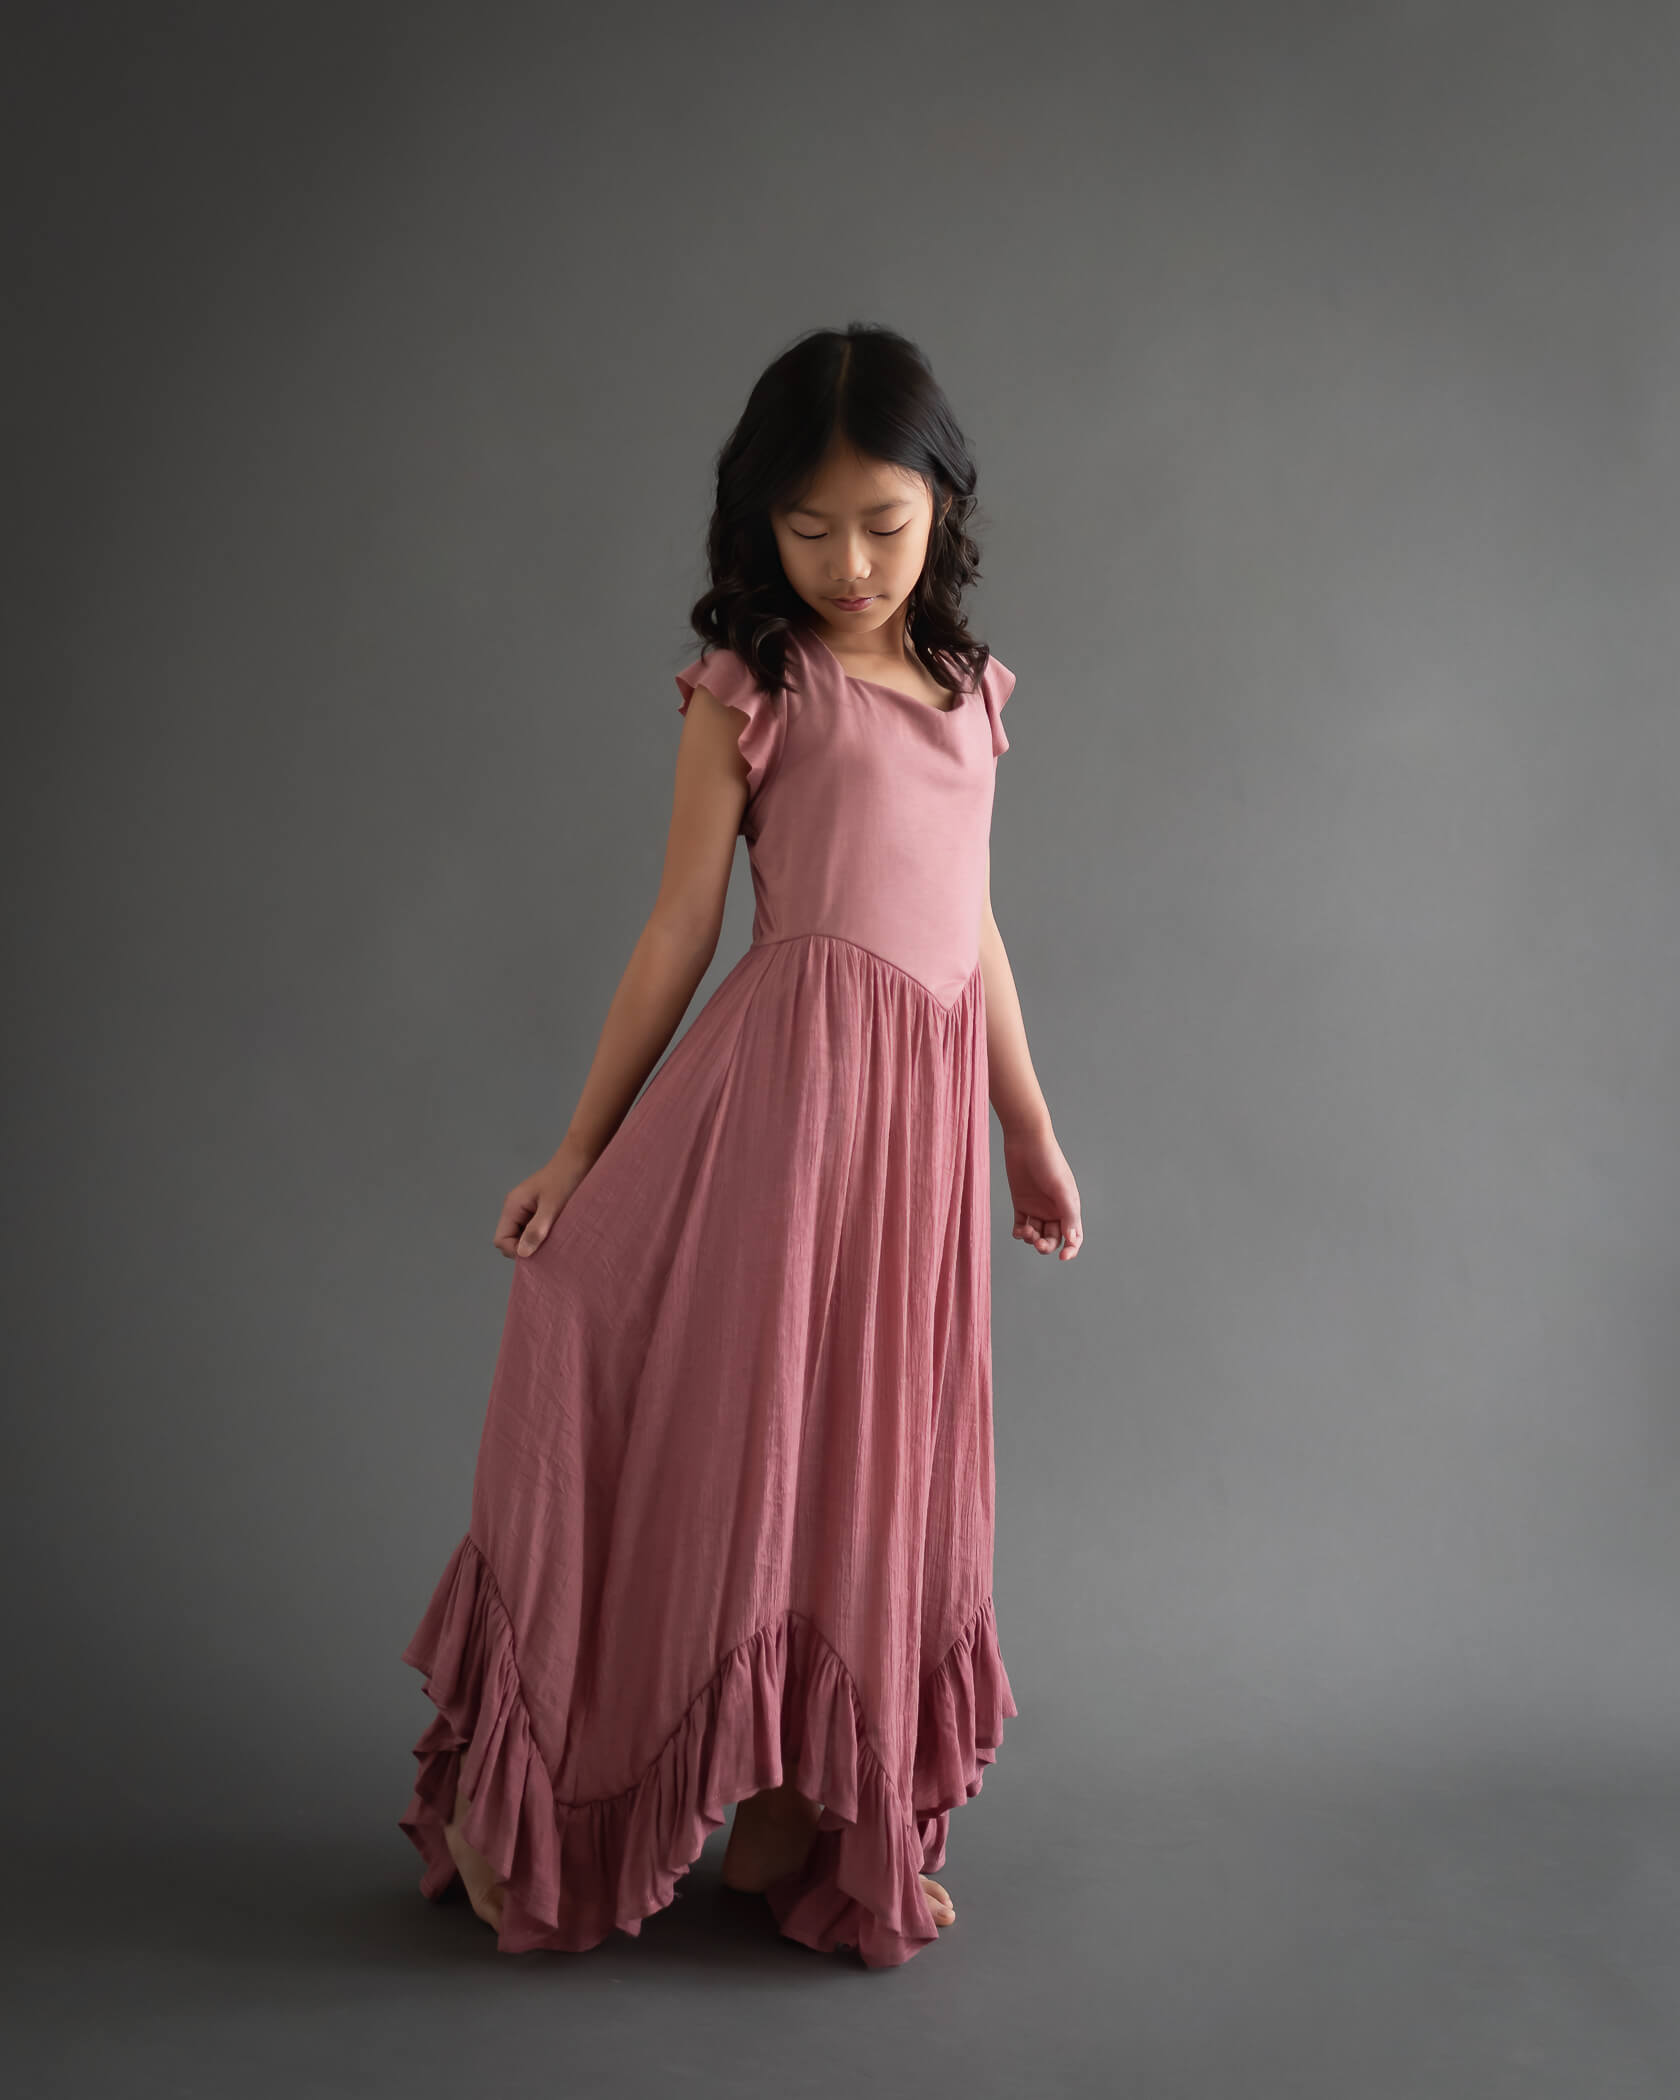 10 year old girl in studio portrait wearing a long dress holding the blush-colored dress out and looking down